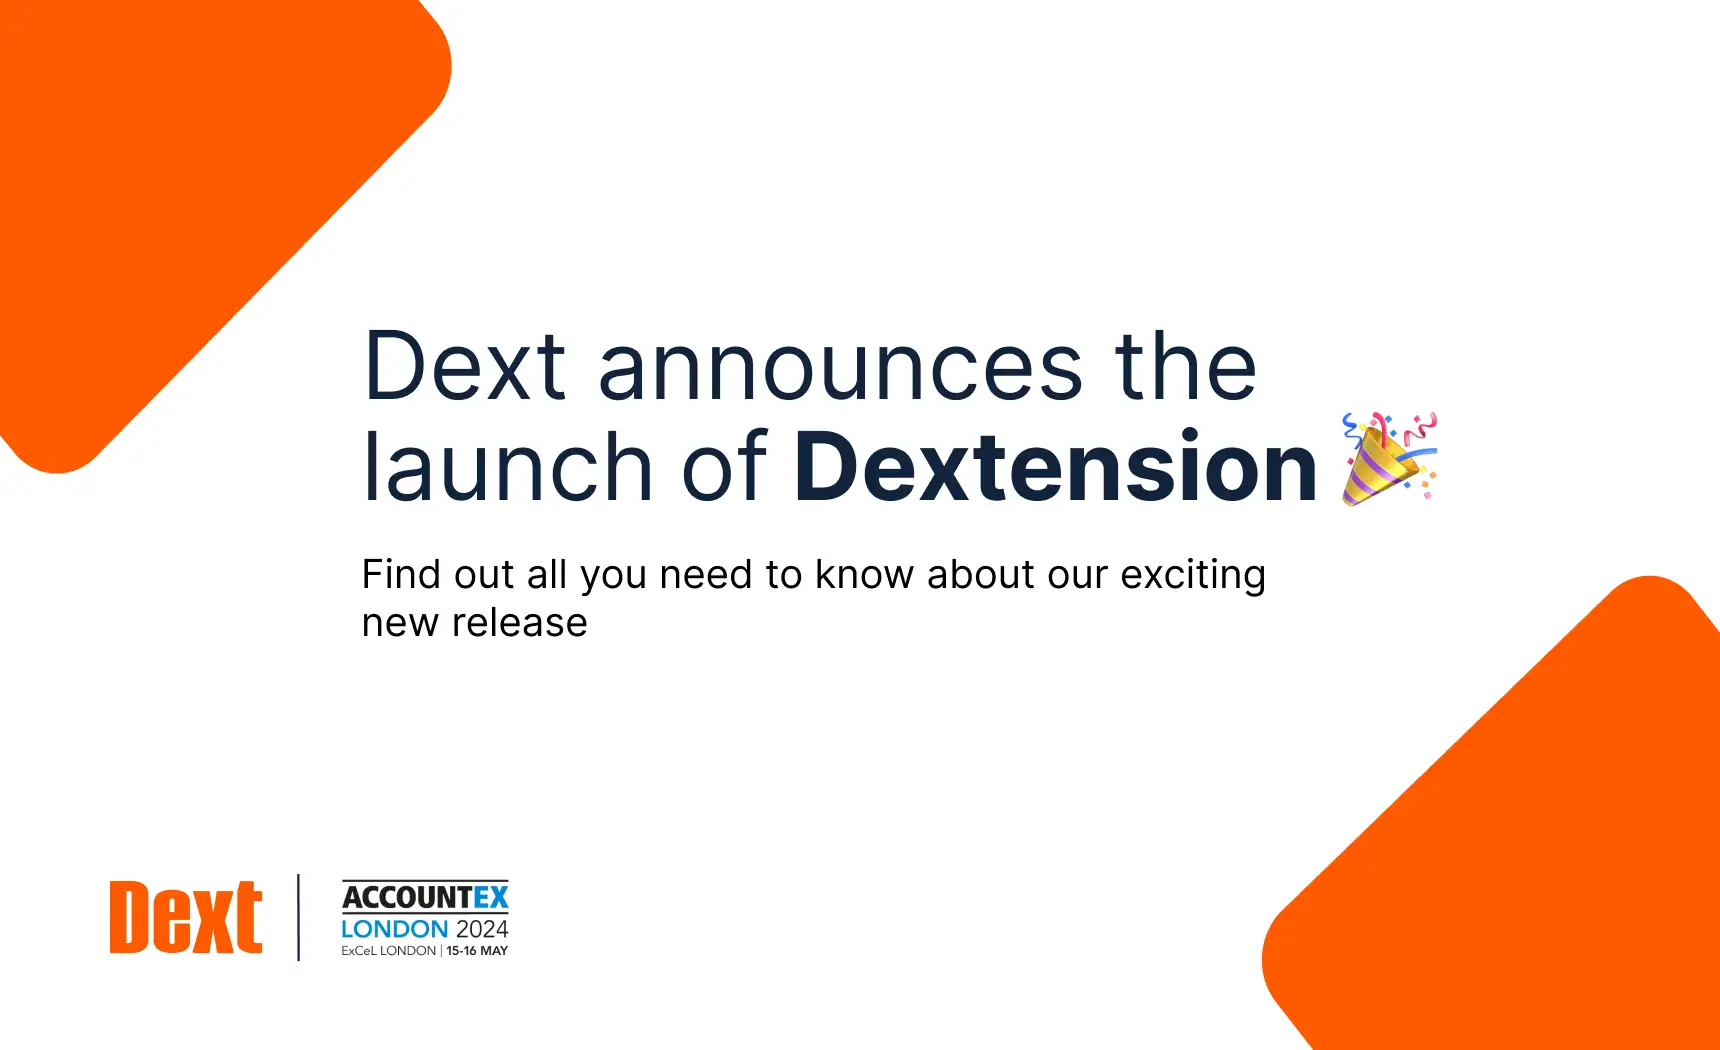 Dext announces the general availability of Dextension at Accountex London, 2024 logo